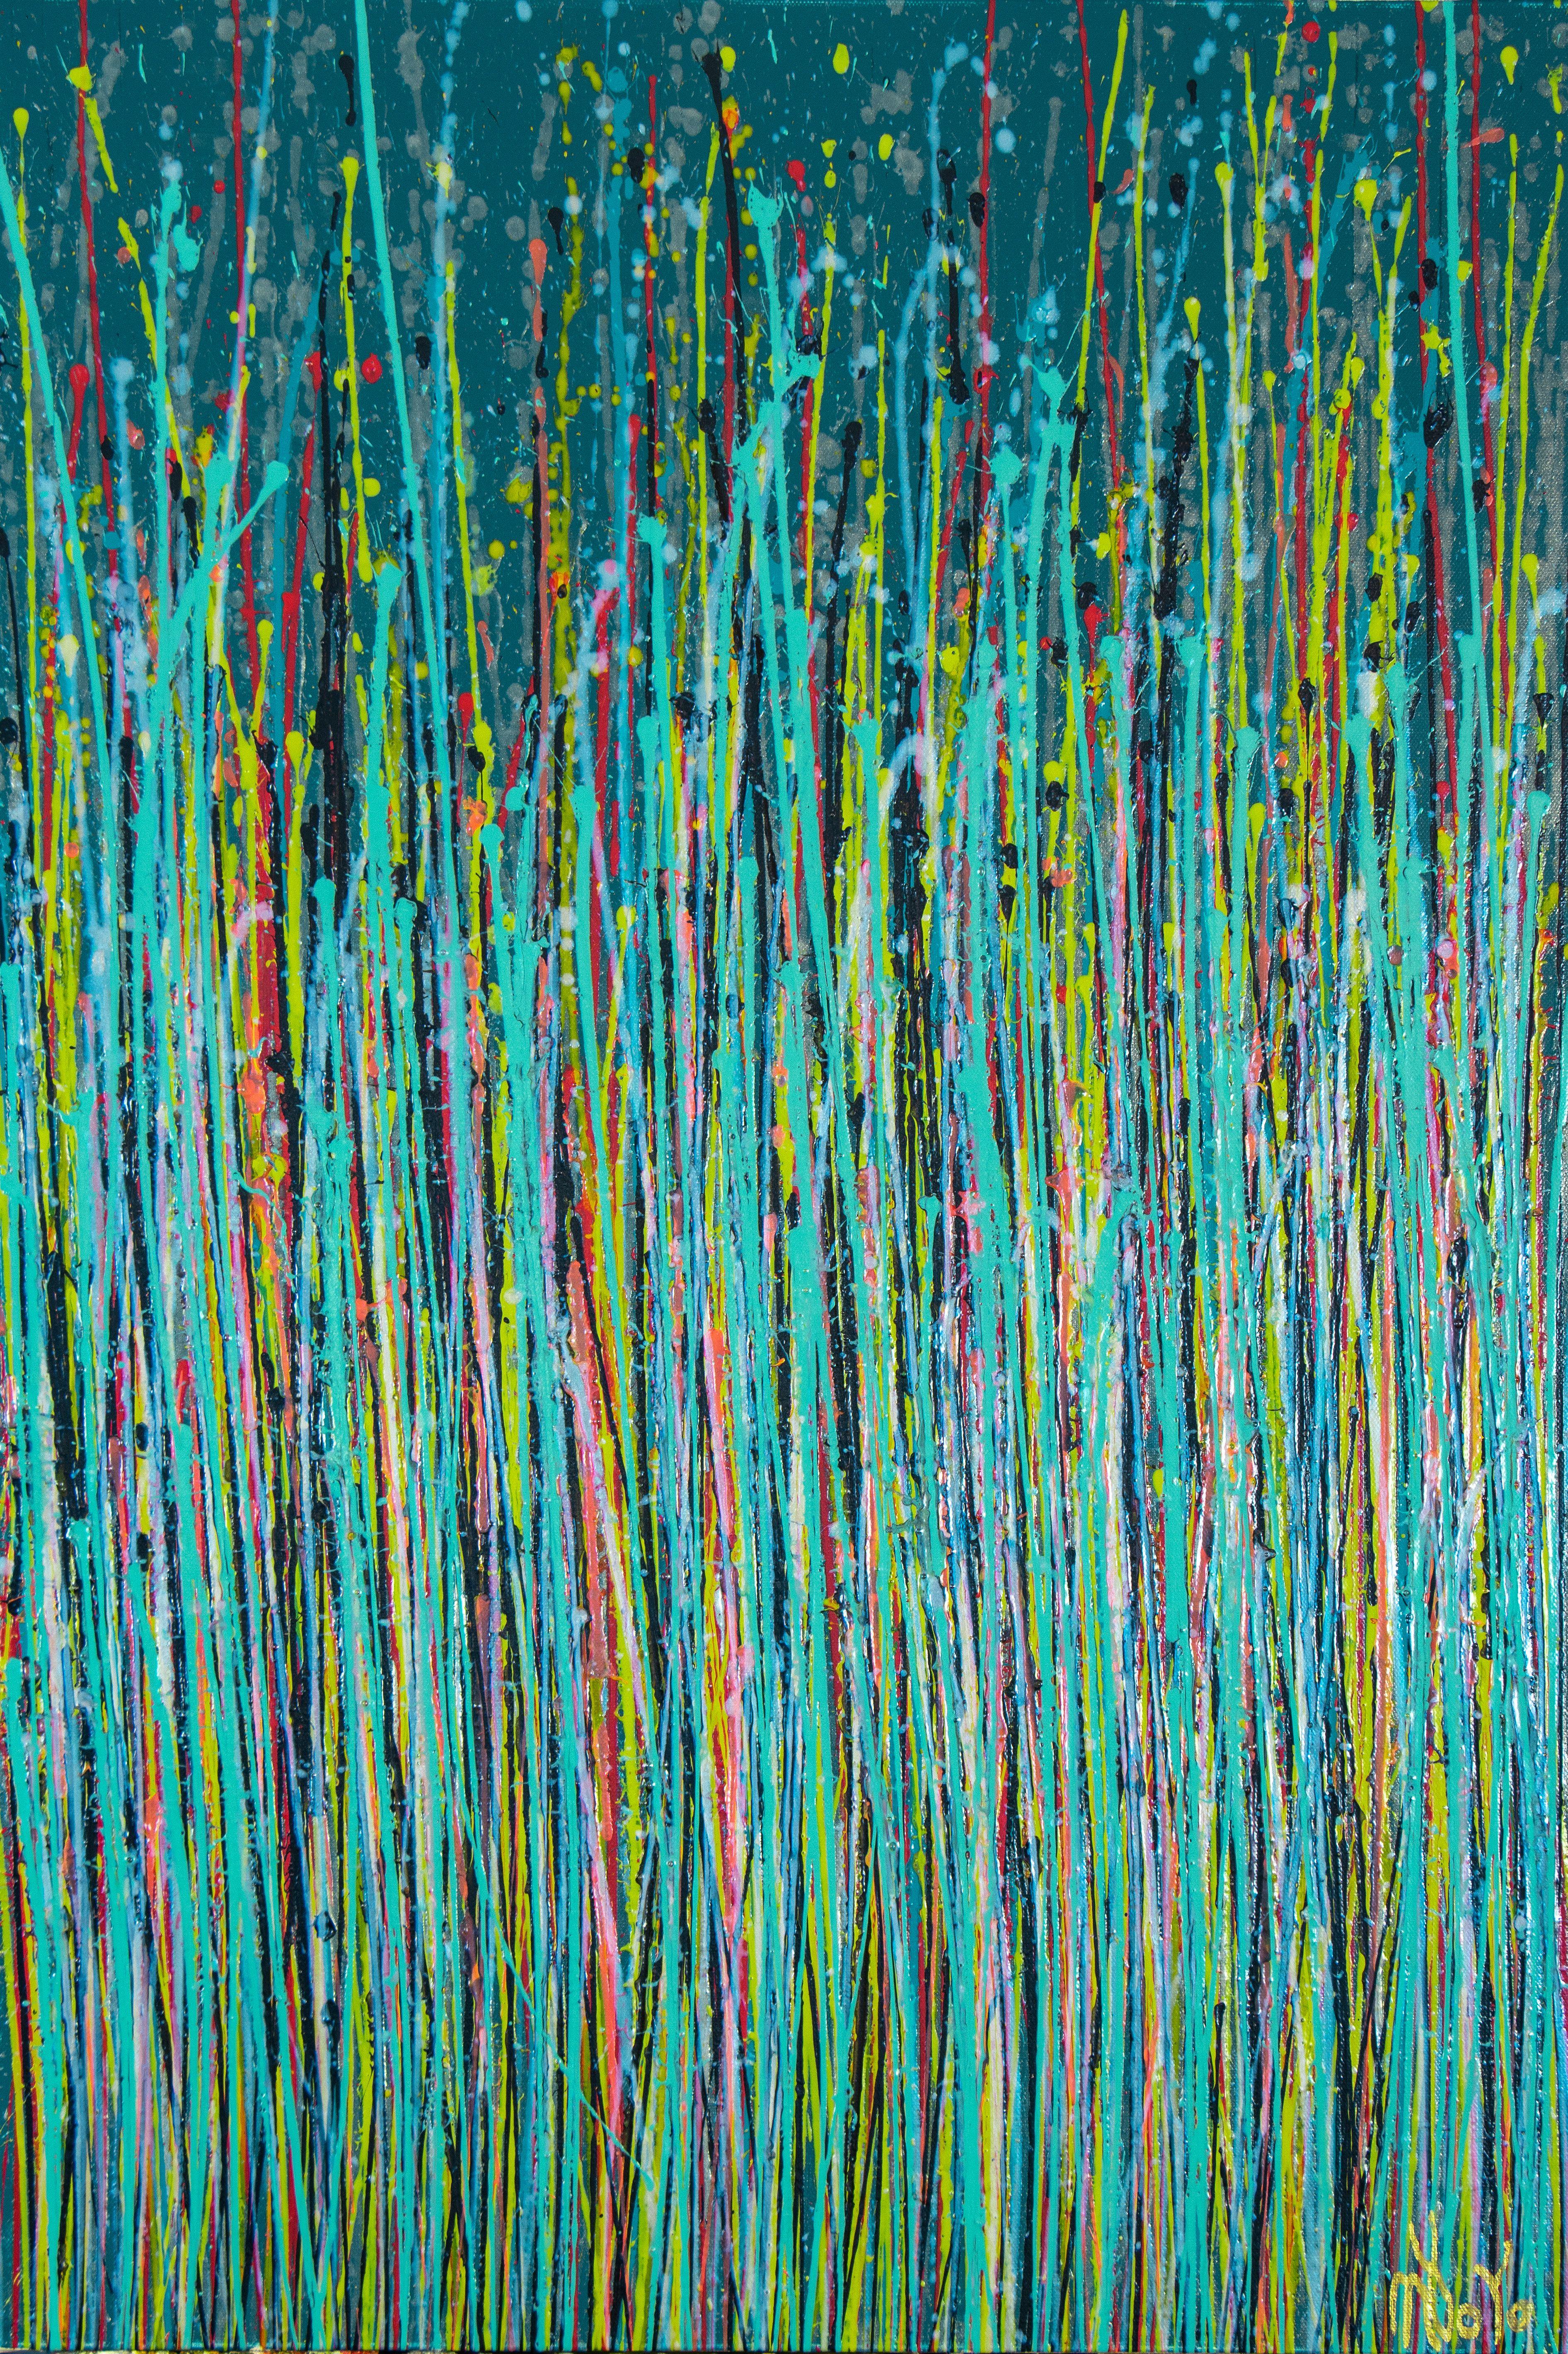 Expressive modern abstract, bold full of life, gloss and shimmer! inspired by nature. Shades of iridescent blue, yellow, red, teal over blue background. signed in front.    I include a certificate of authenticity that lists the materials as well as